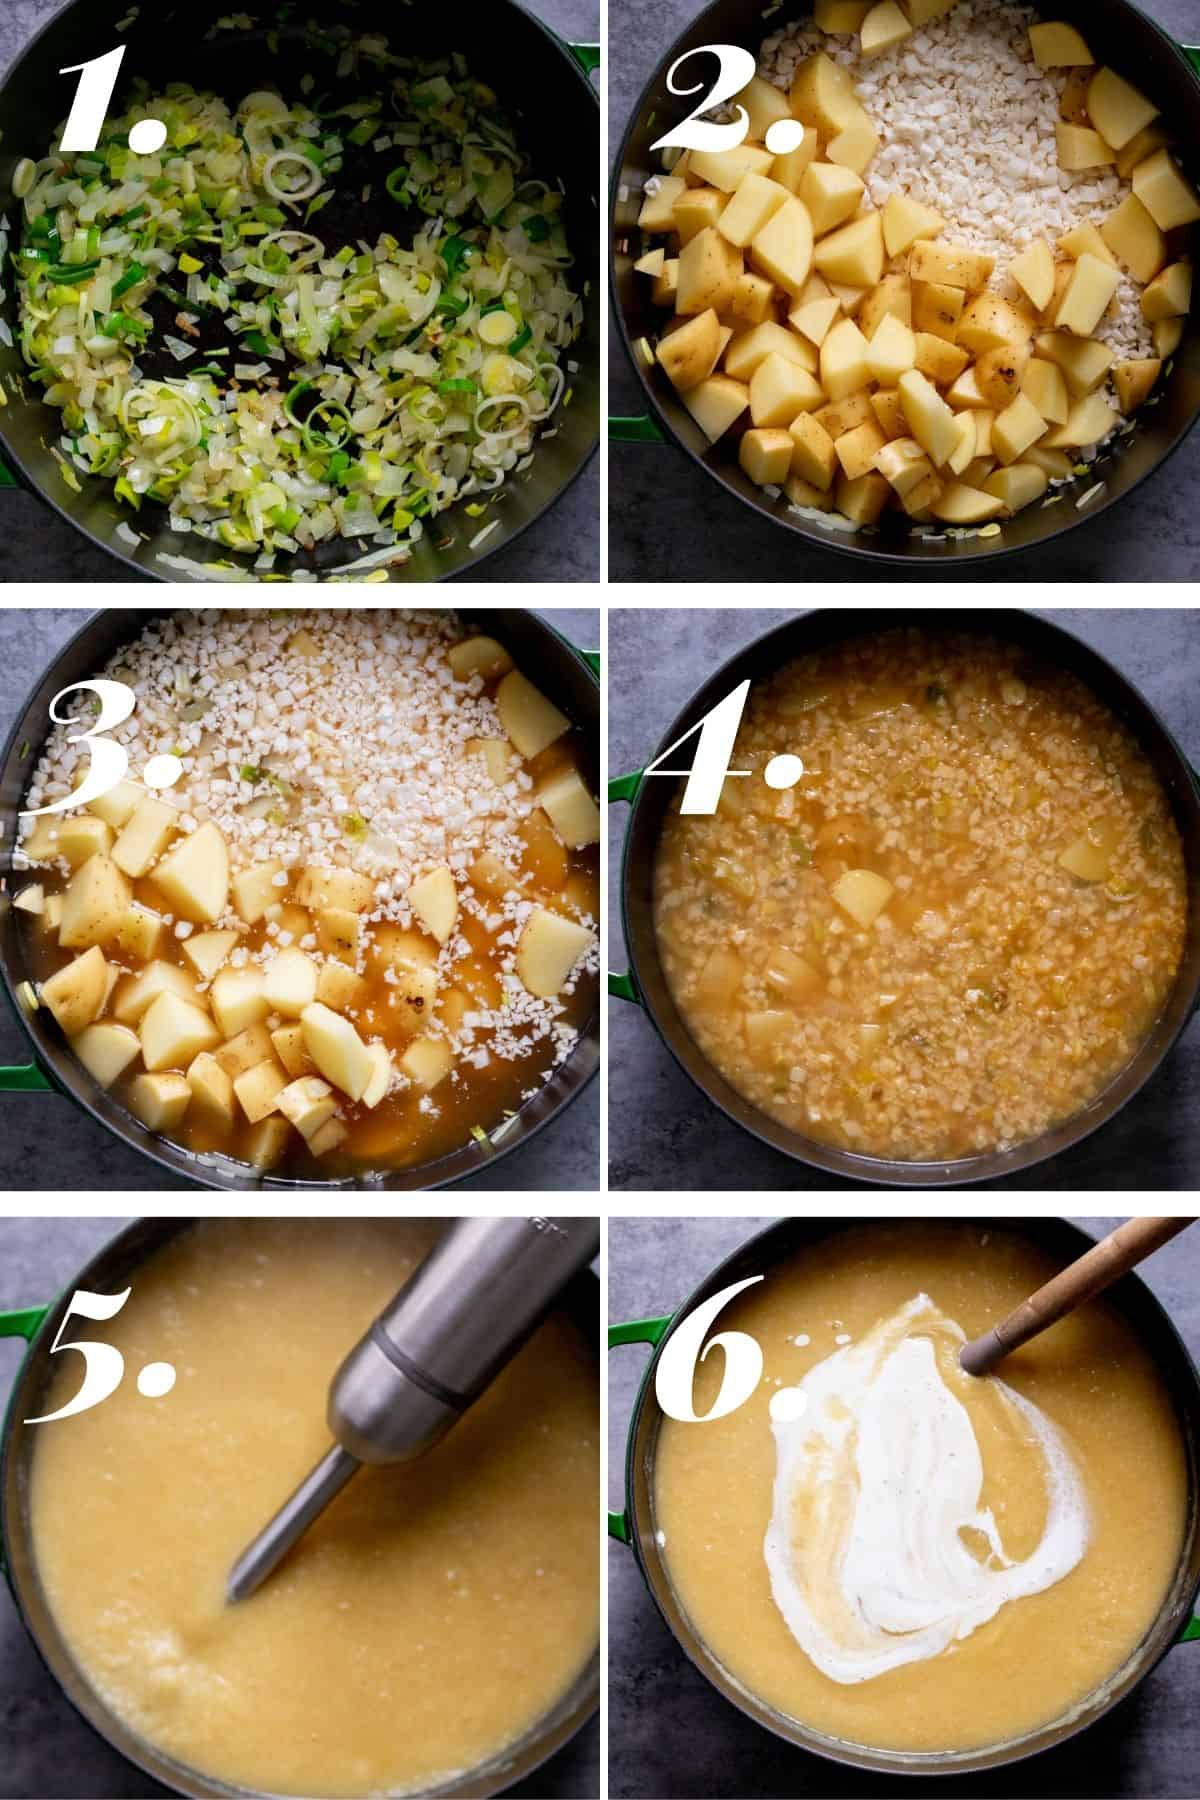 Process shots of making soup numbered in order from 1-6.